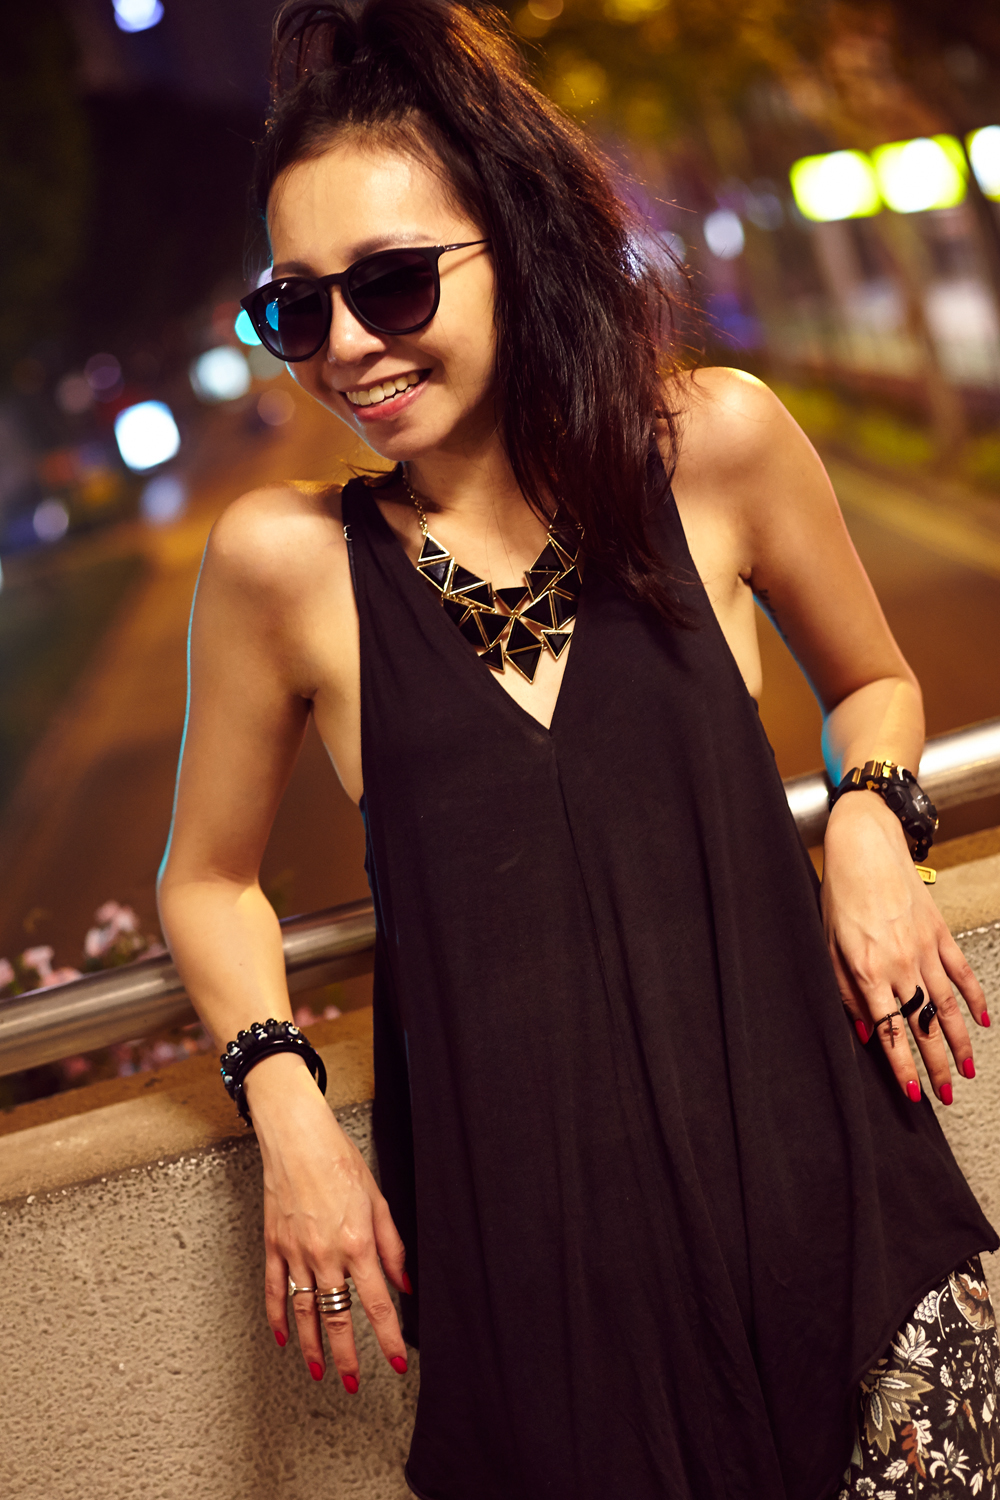 singapore girl teen teenager Love Hipster Sun warmth energy calibre pictures matthew teo streets